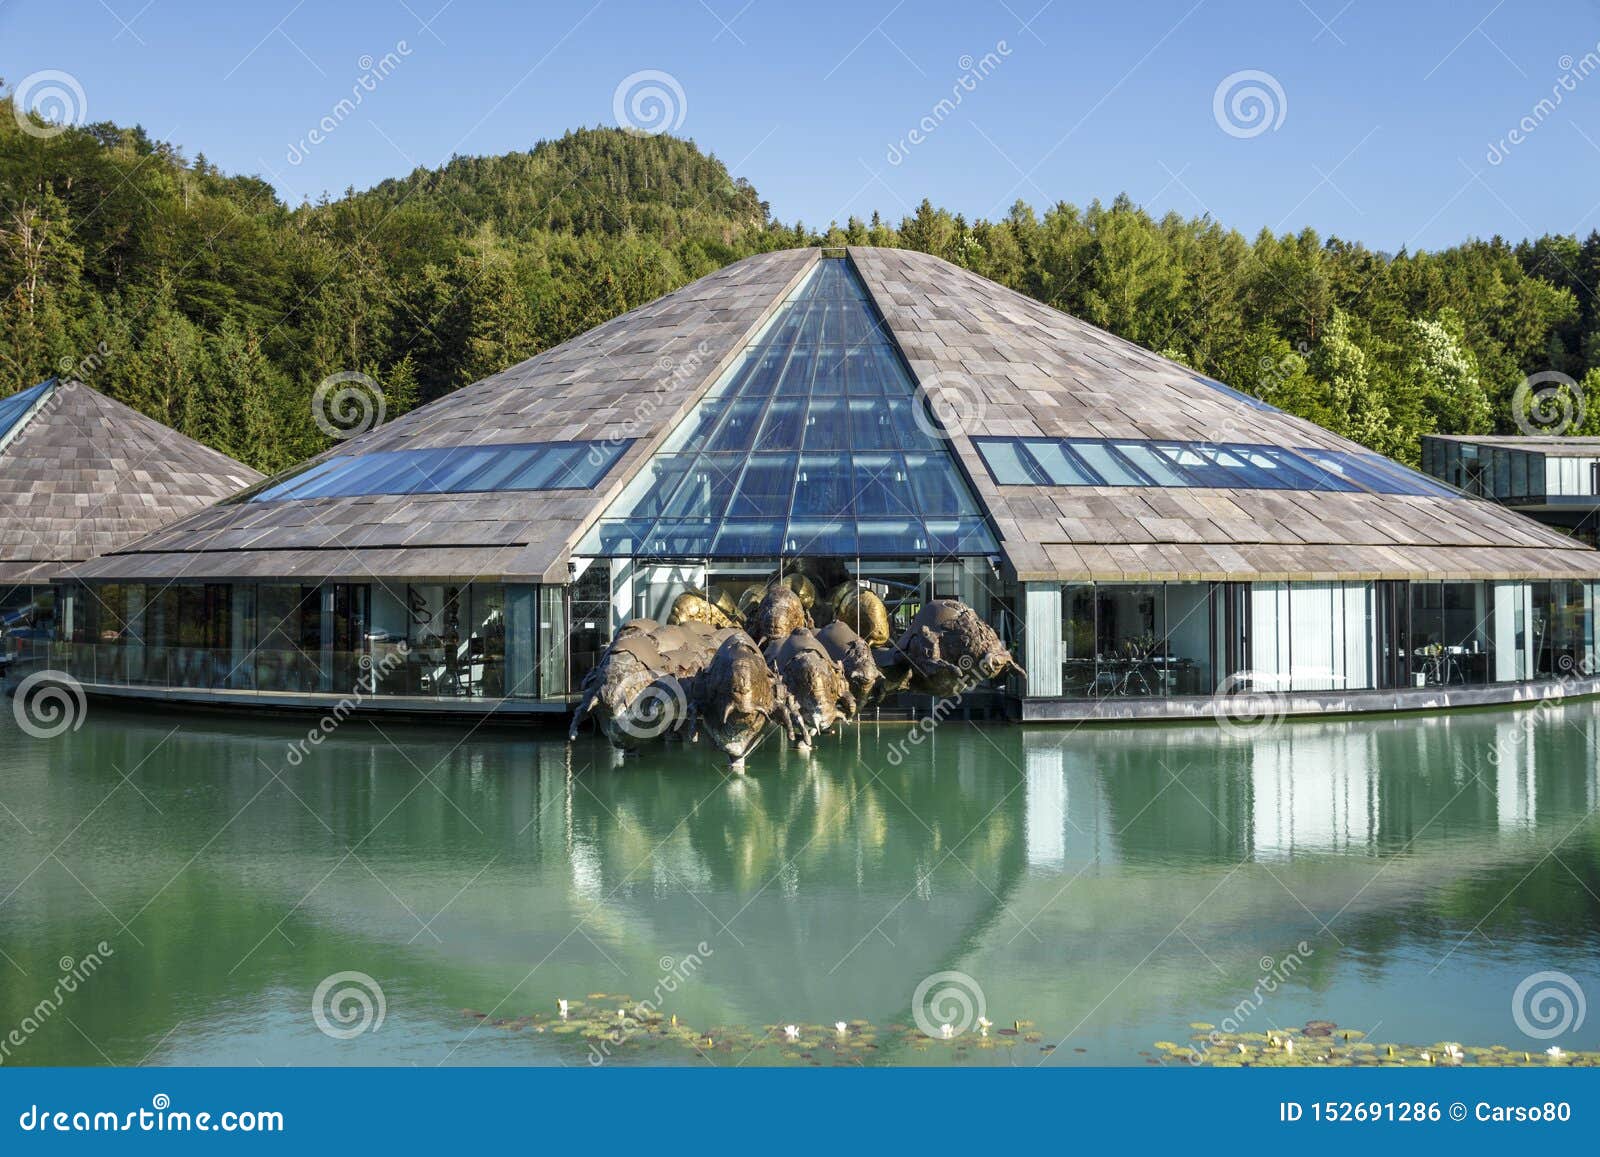 Red Bull Headquarters in Fuschl am See, Austria, 2019 Editorial Photo -  Image of office, beautiful: 152691286